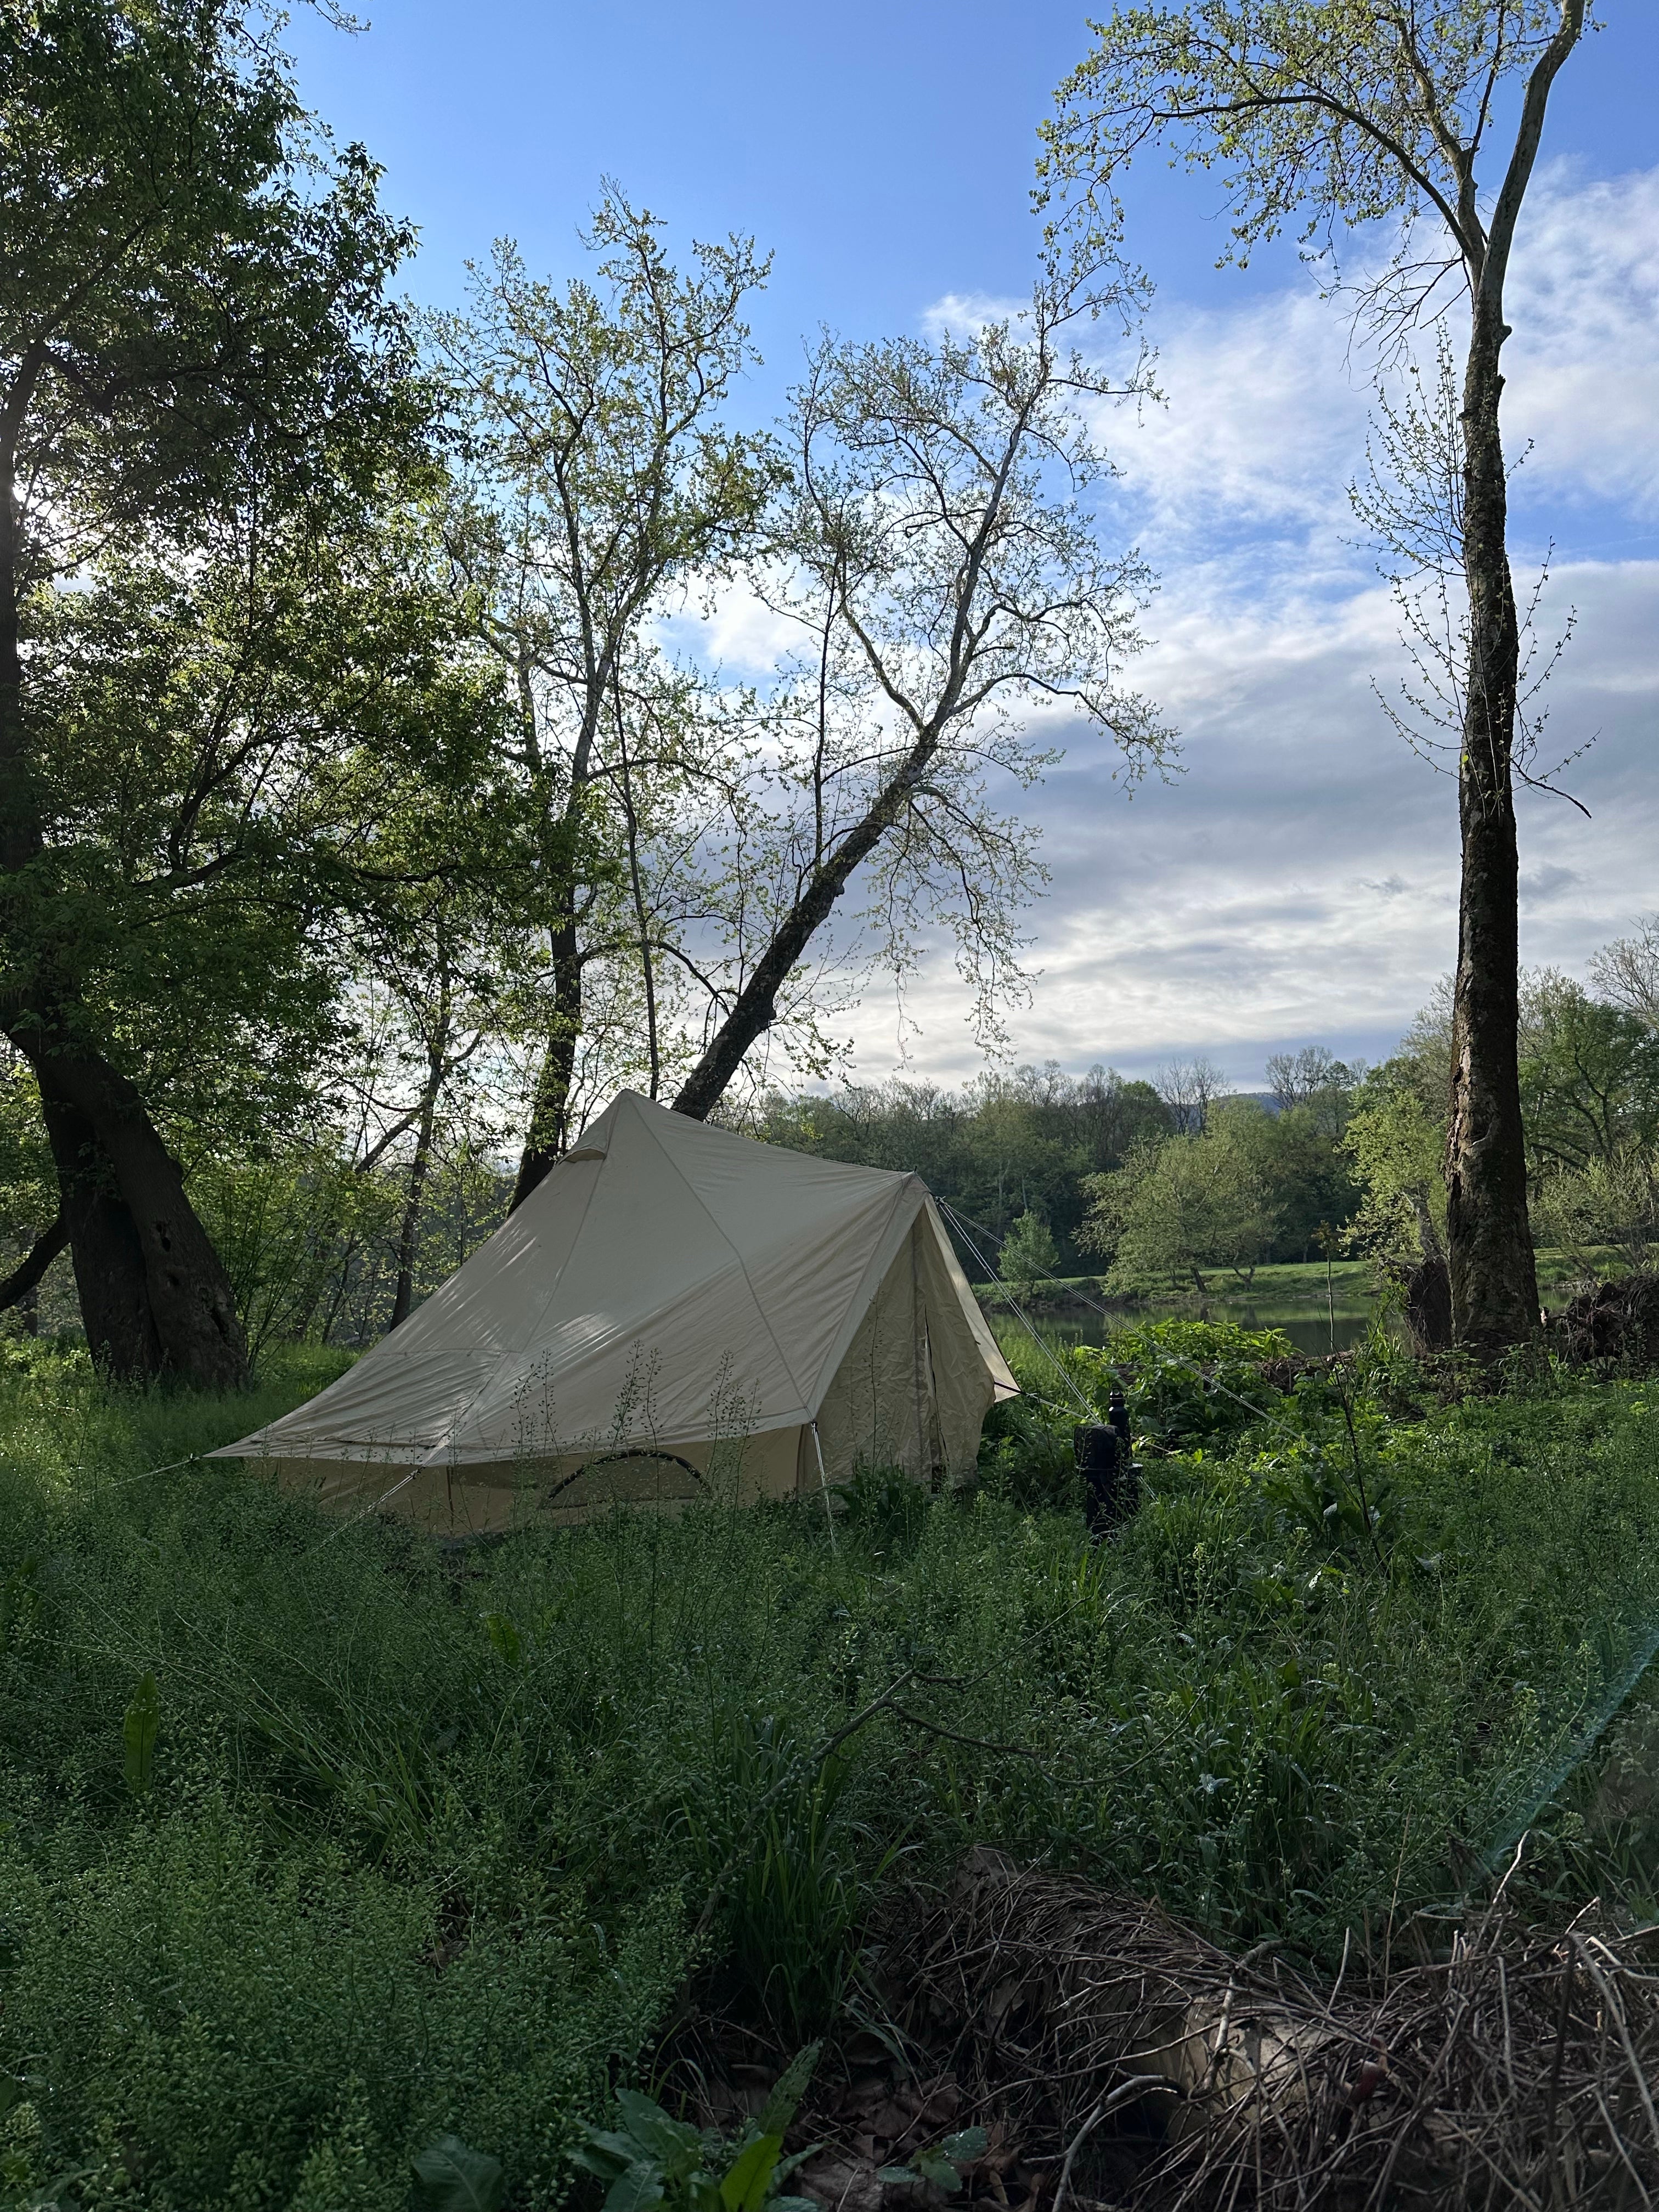 Camper submitted image from South Fork Shenandoah River - 5